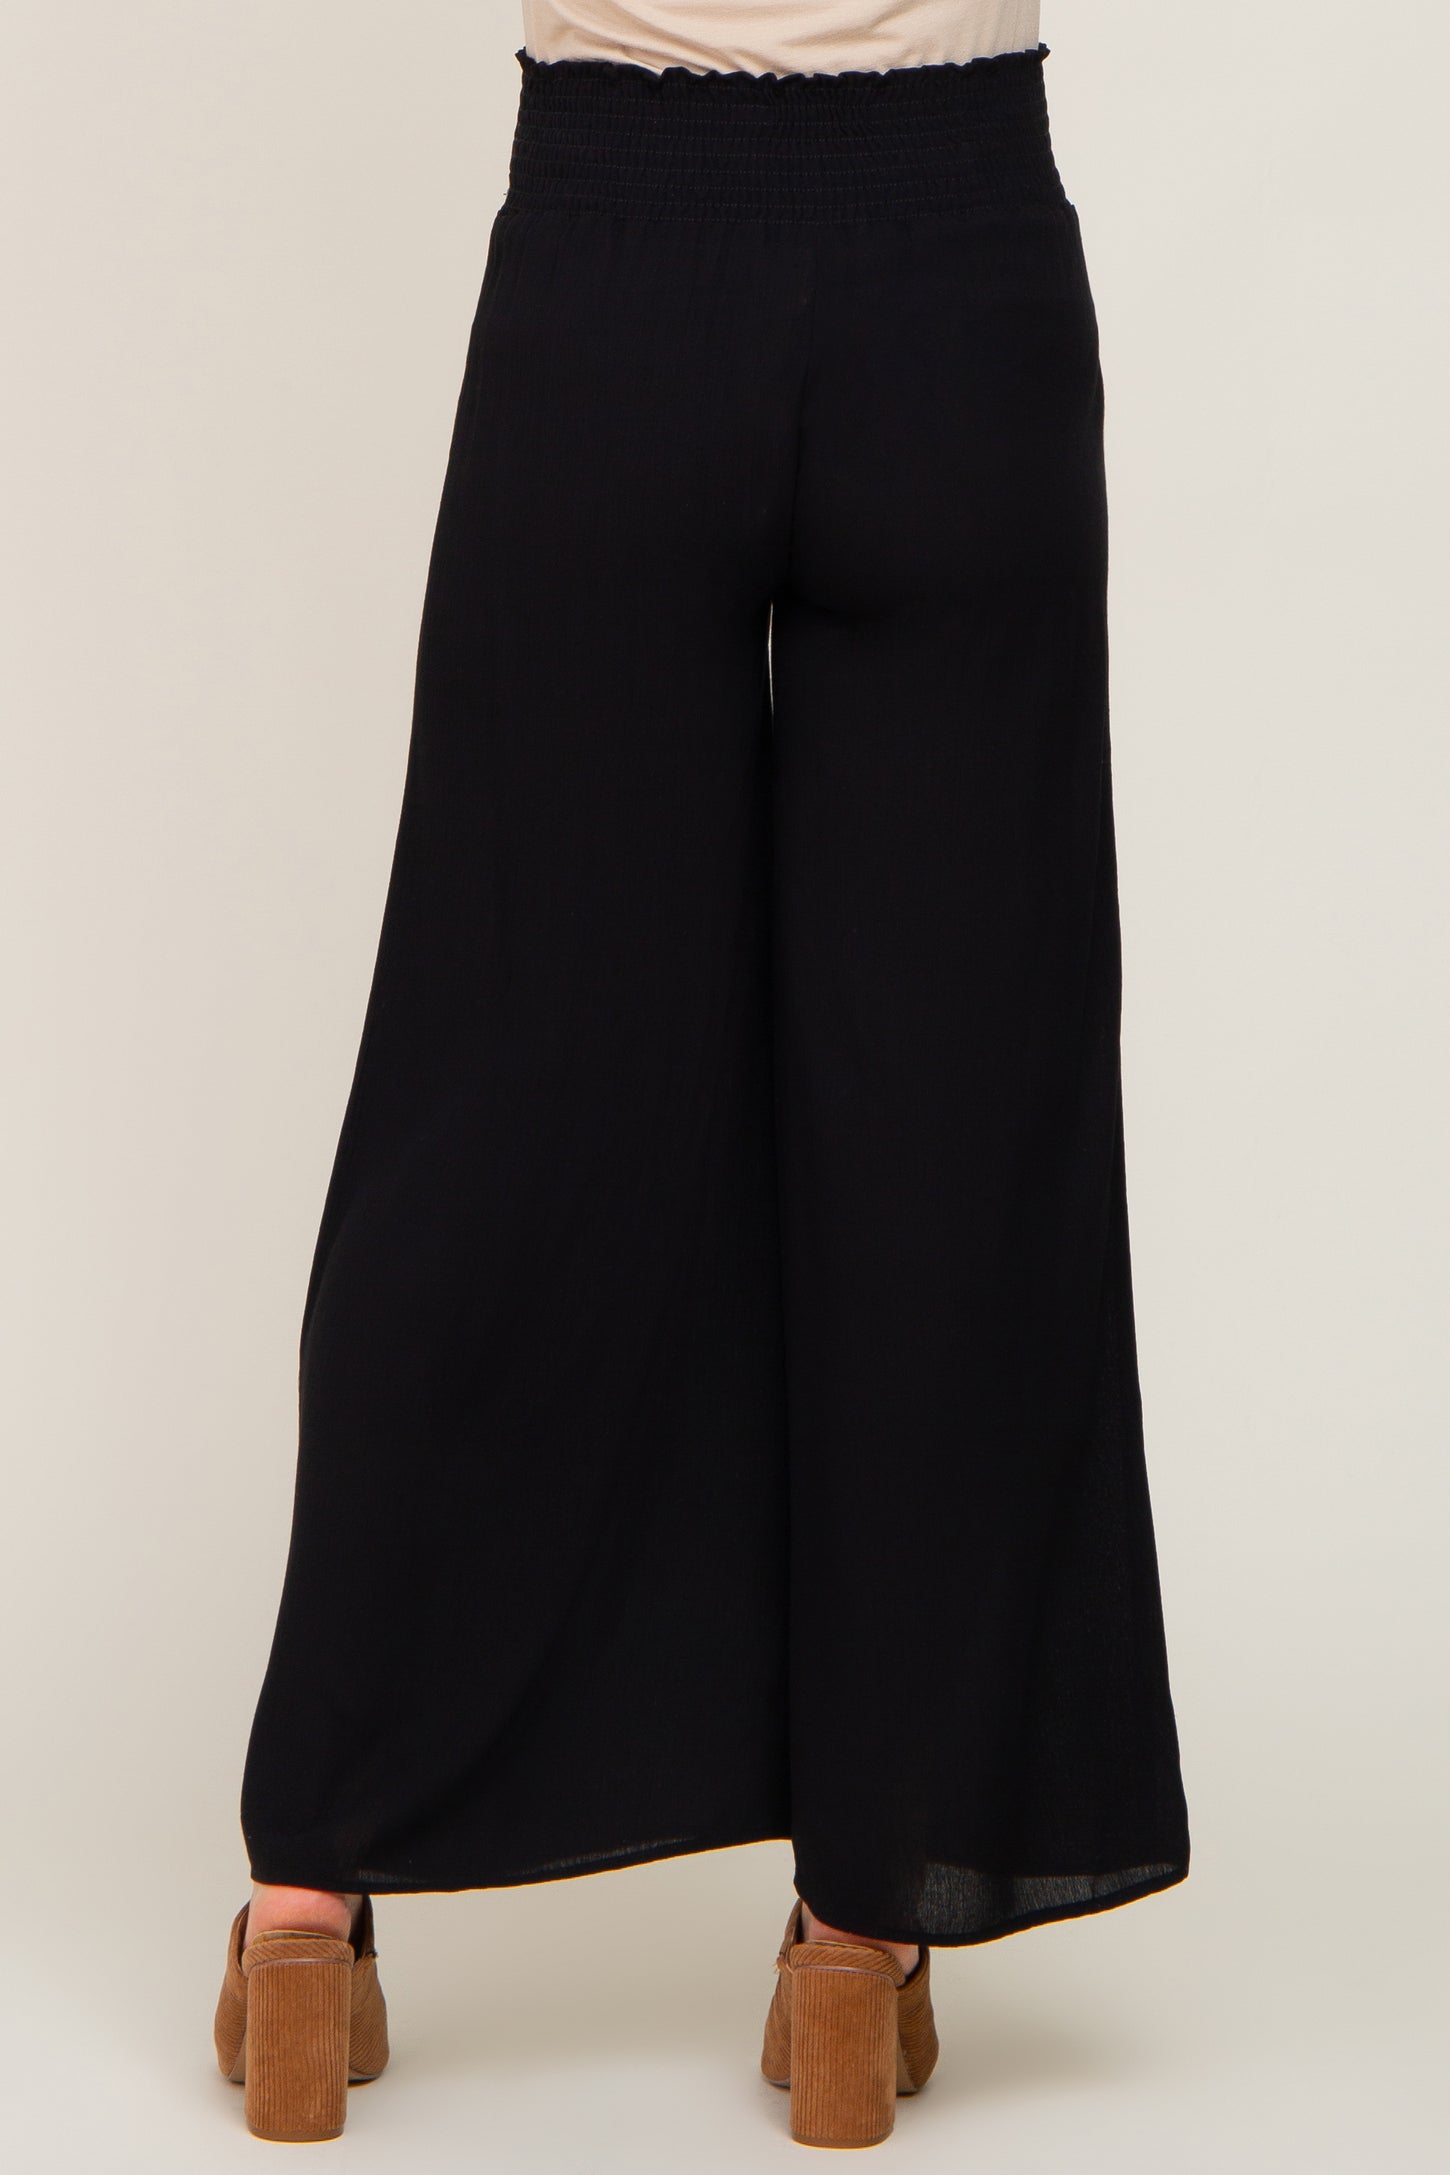 Buy Wide Leg Pants, Palazzo Pants, High Waisted Pants, Maxi Skirt Pants,  Plus Size Clothing, Pants for Women Trousers, Long Pants, Formal Pants  Online in India 